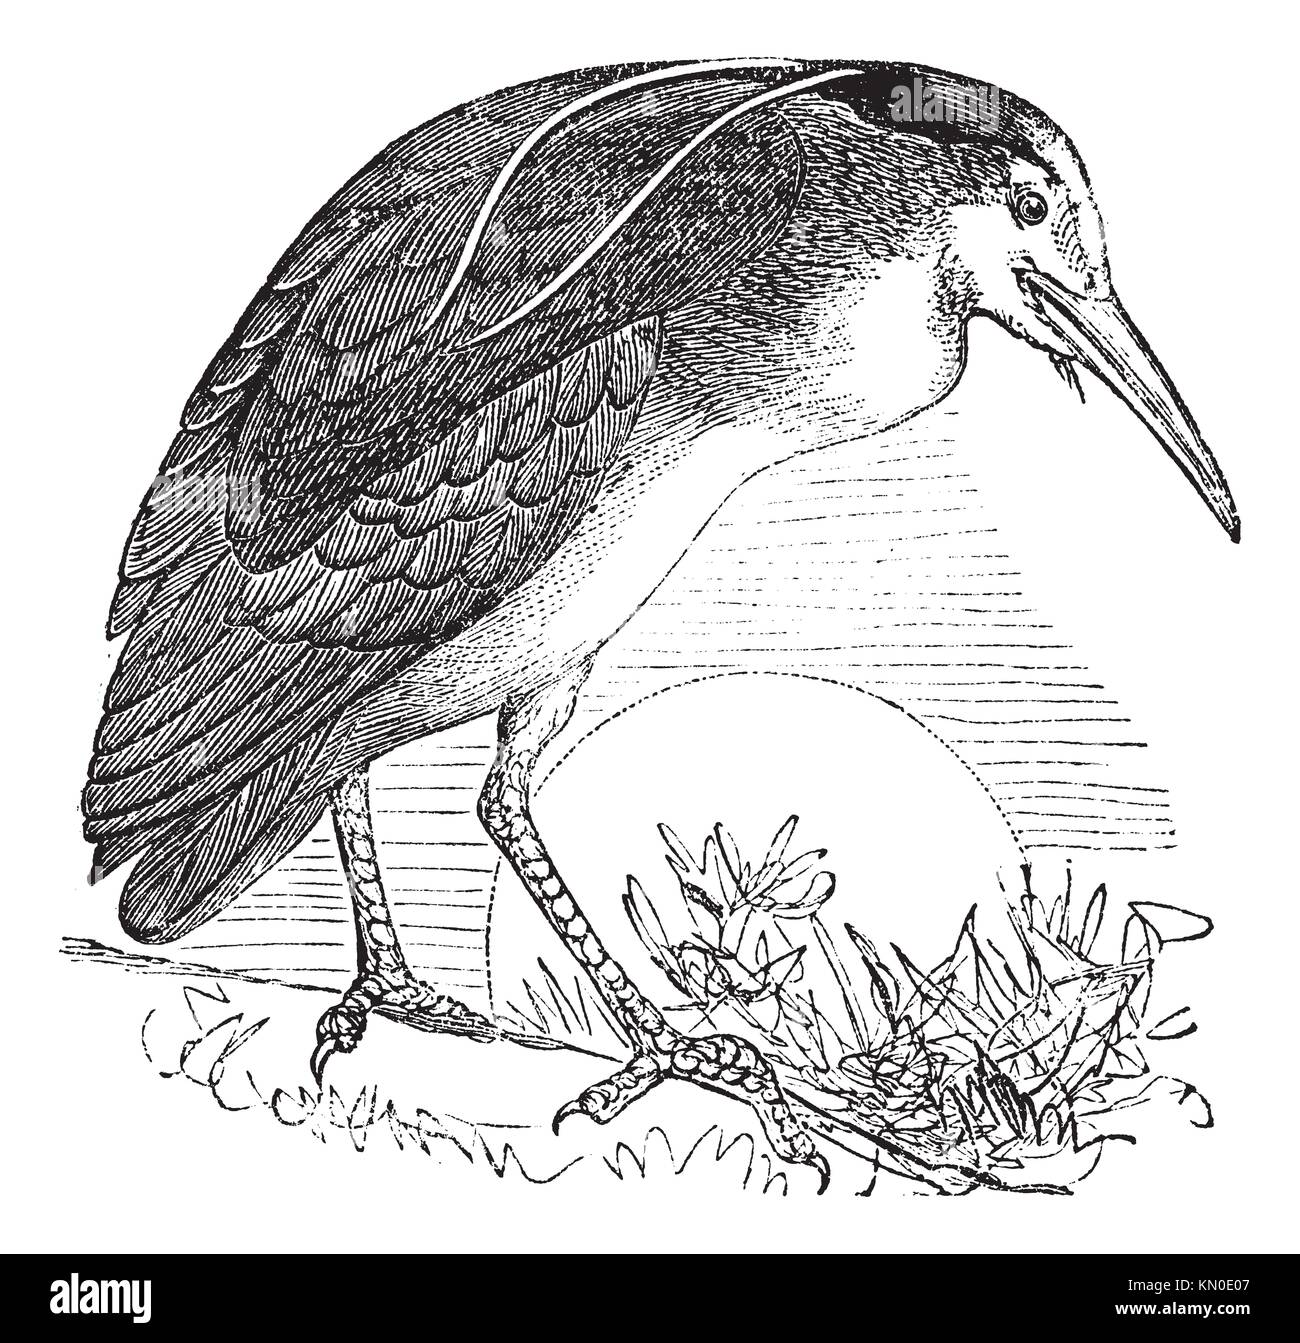 Night Heron also known as Nycticorax nycticorax, Bird, North America, vintage engraved illustration of Night Heron, North America Stock Photo